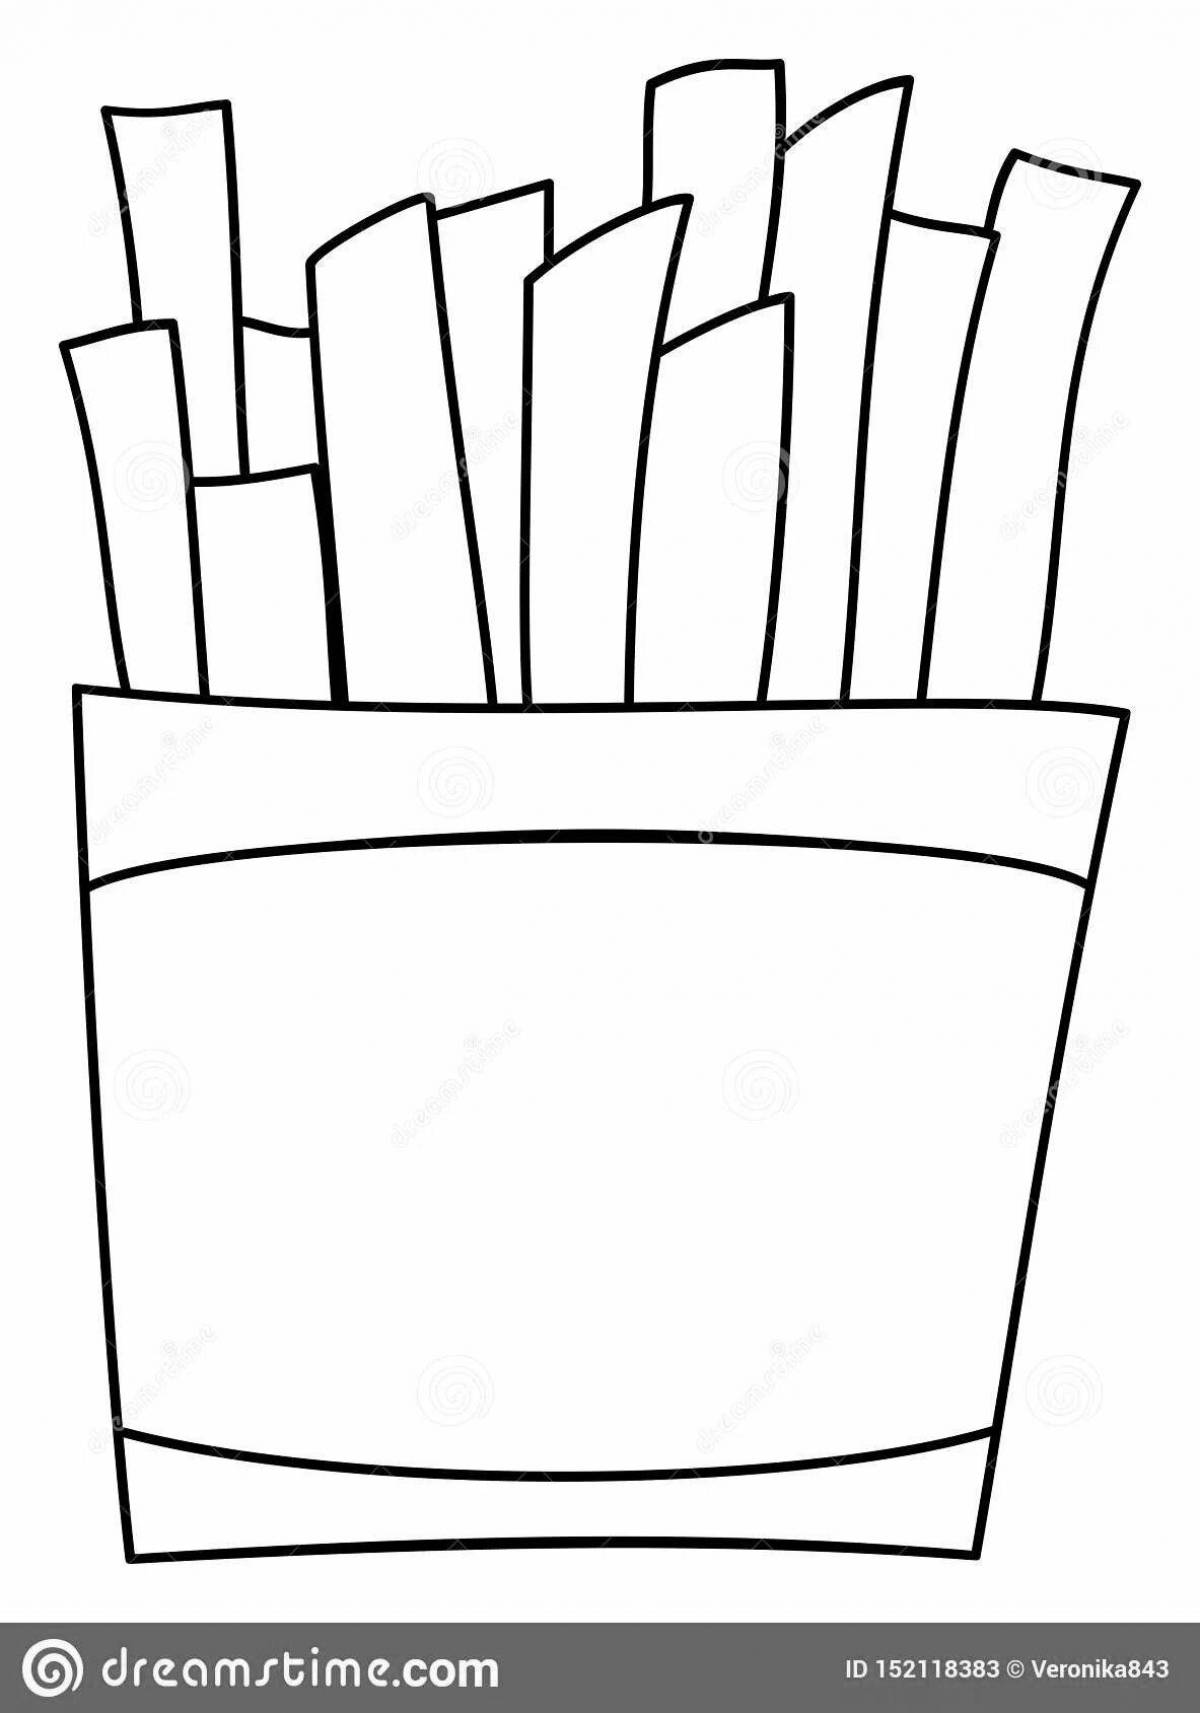 An interesting coloring book with french fries for kids